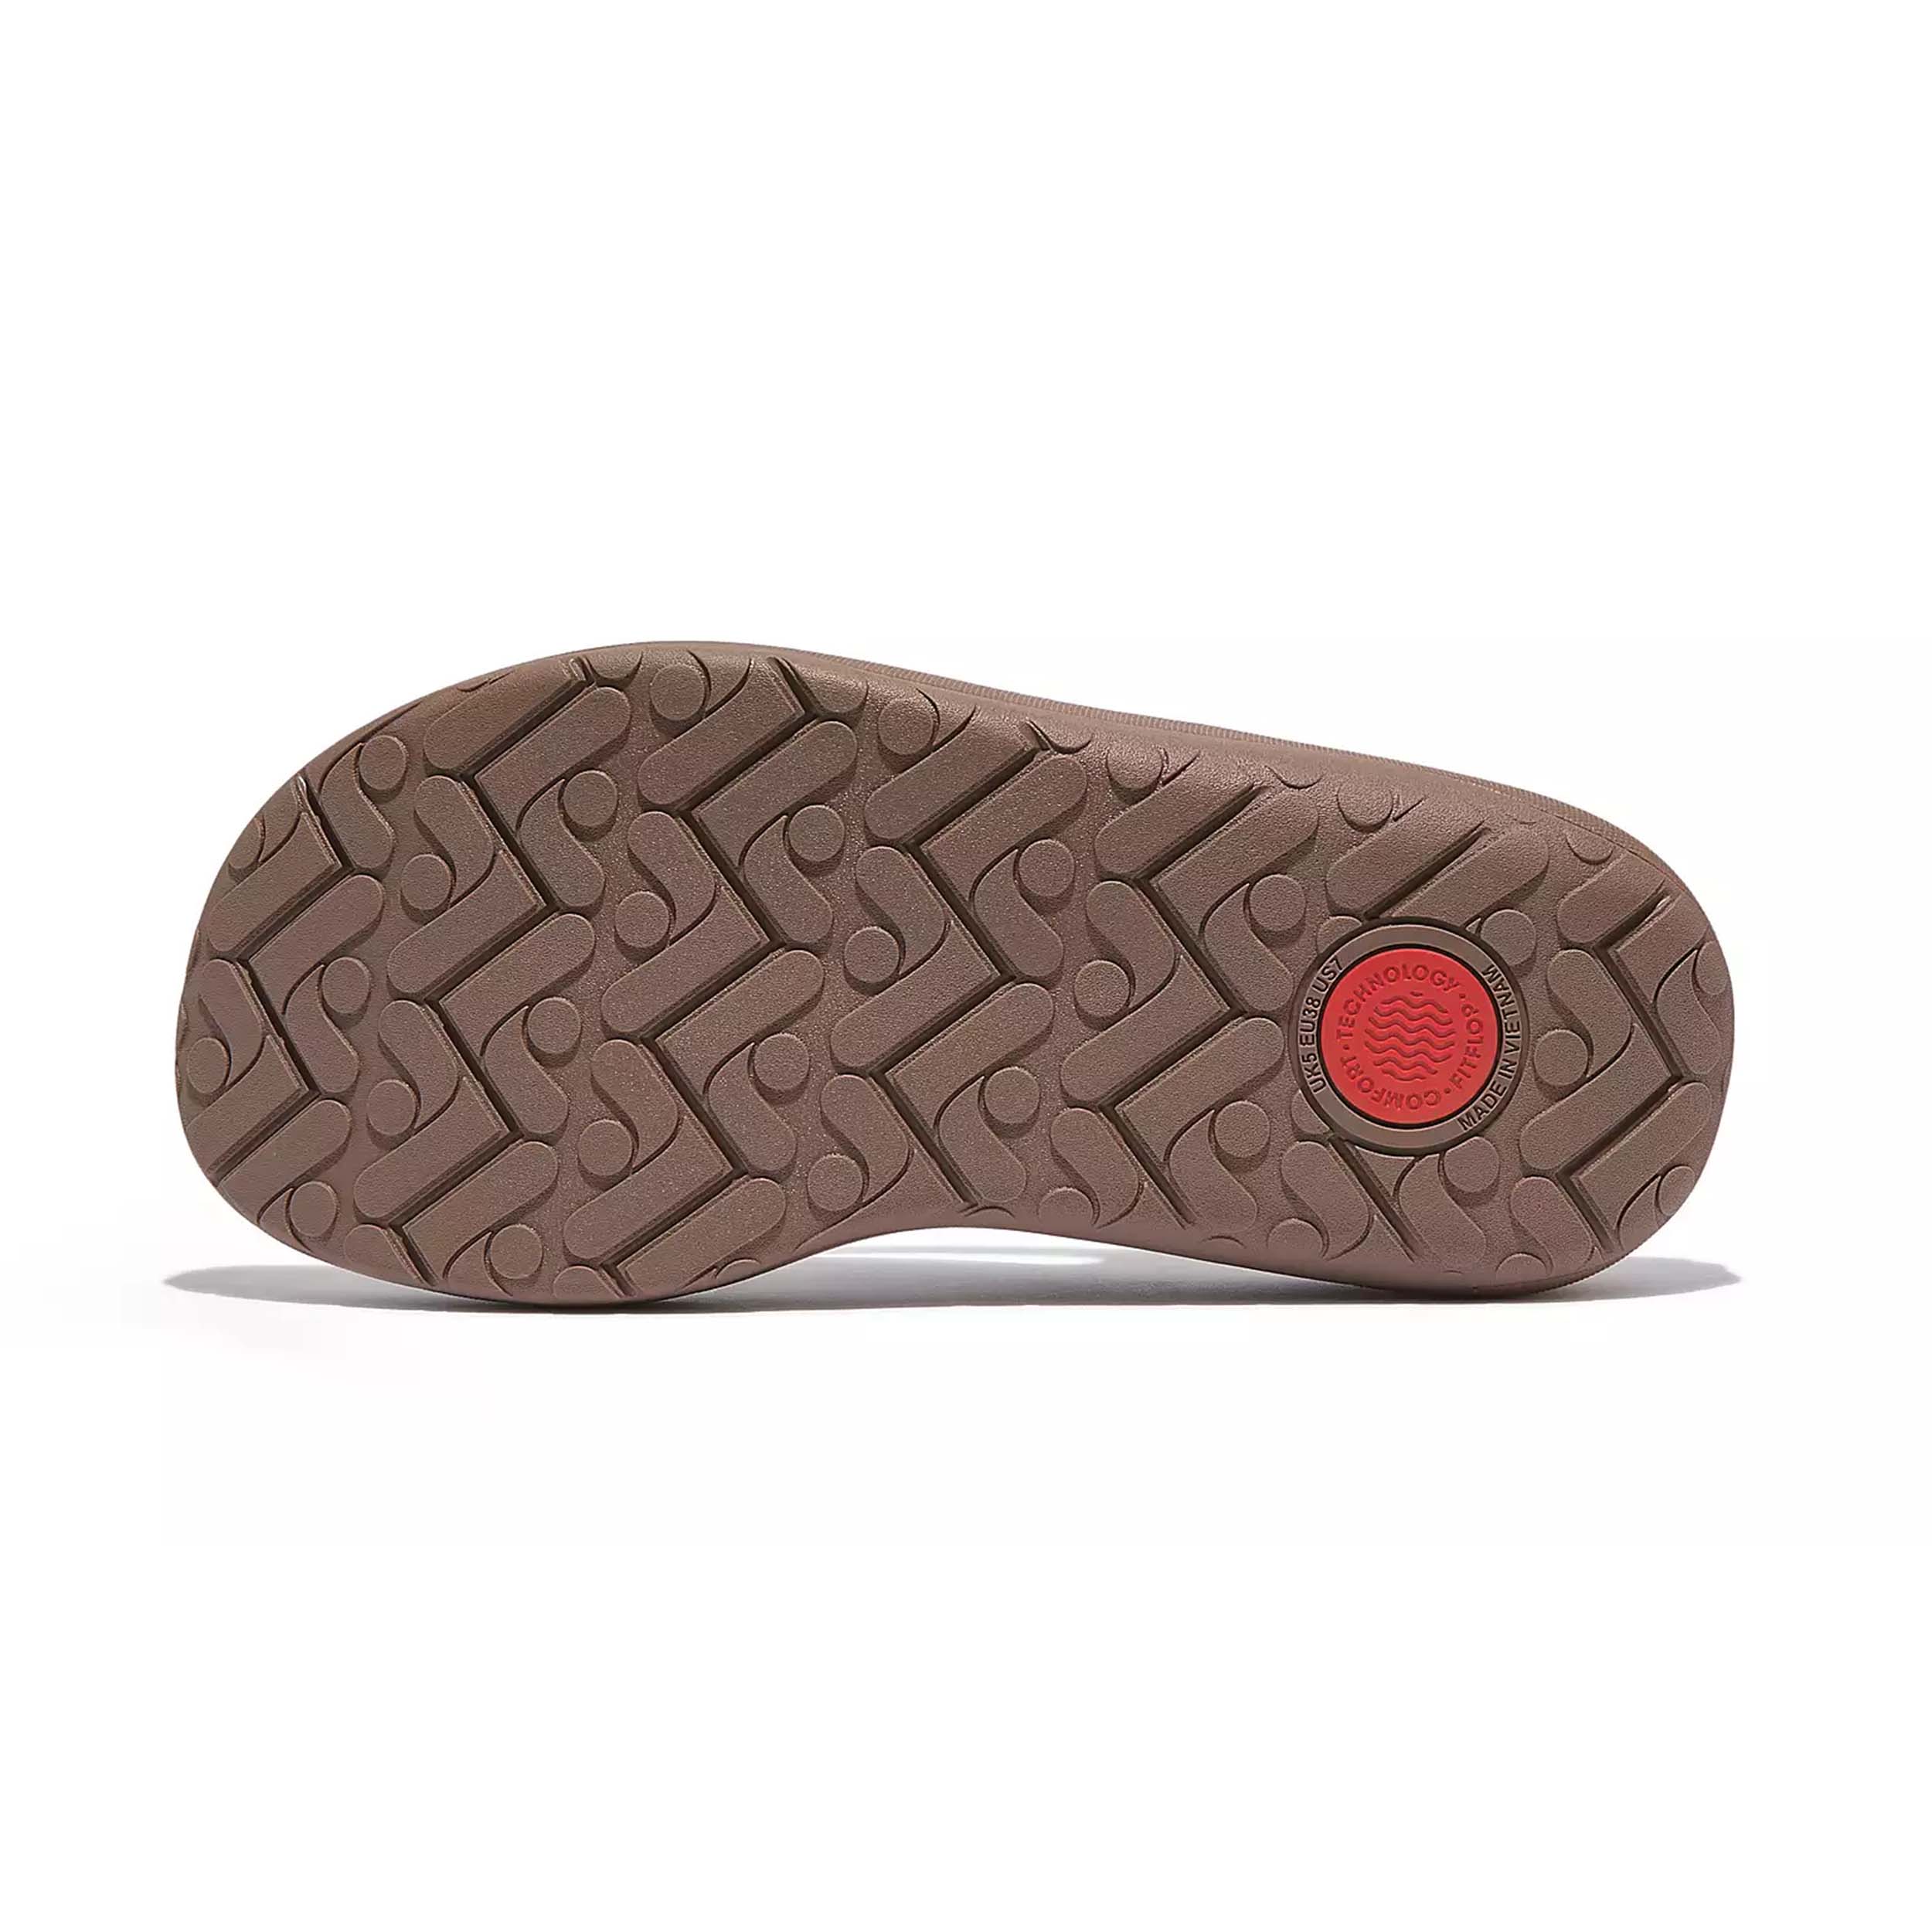 FitFlop HT5 Slipper Relieff Metallic Recovery Bronze